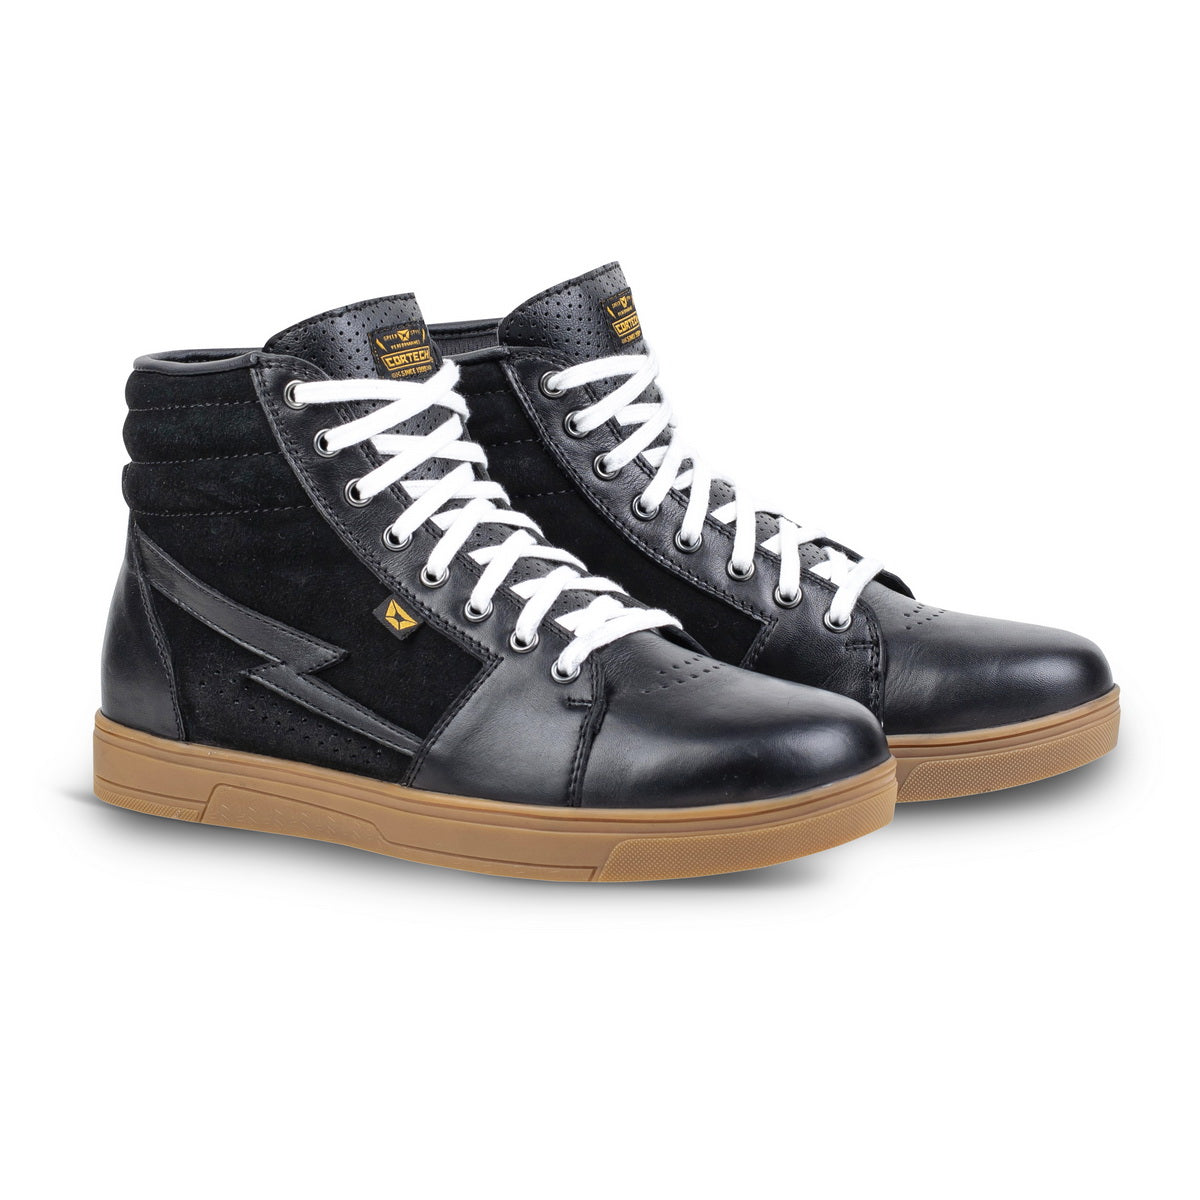 Cortech ‘The Slayer’ Mens Black and Gum Casual Street Style Suede with Leather High-Top Riding Shoe